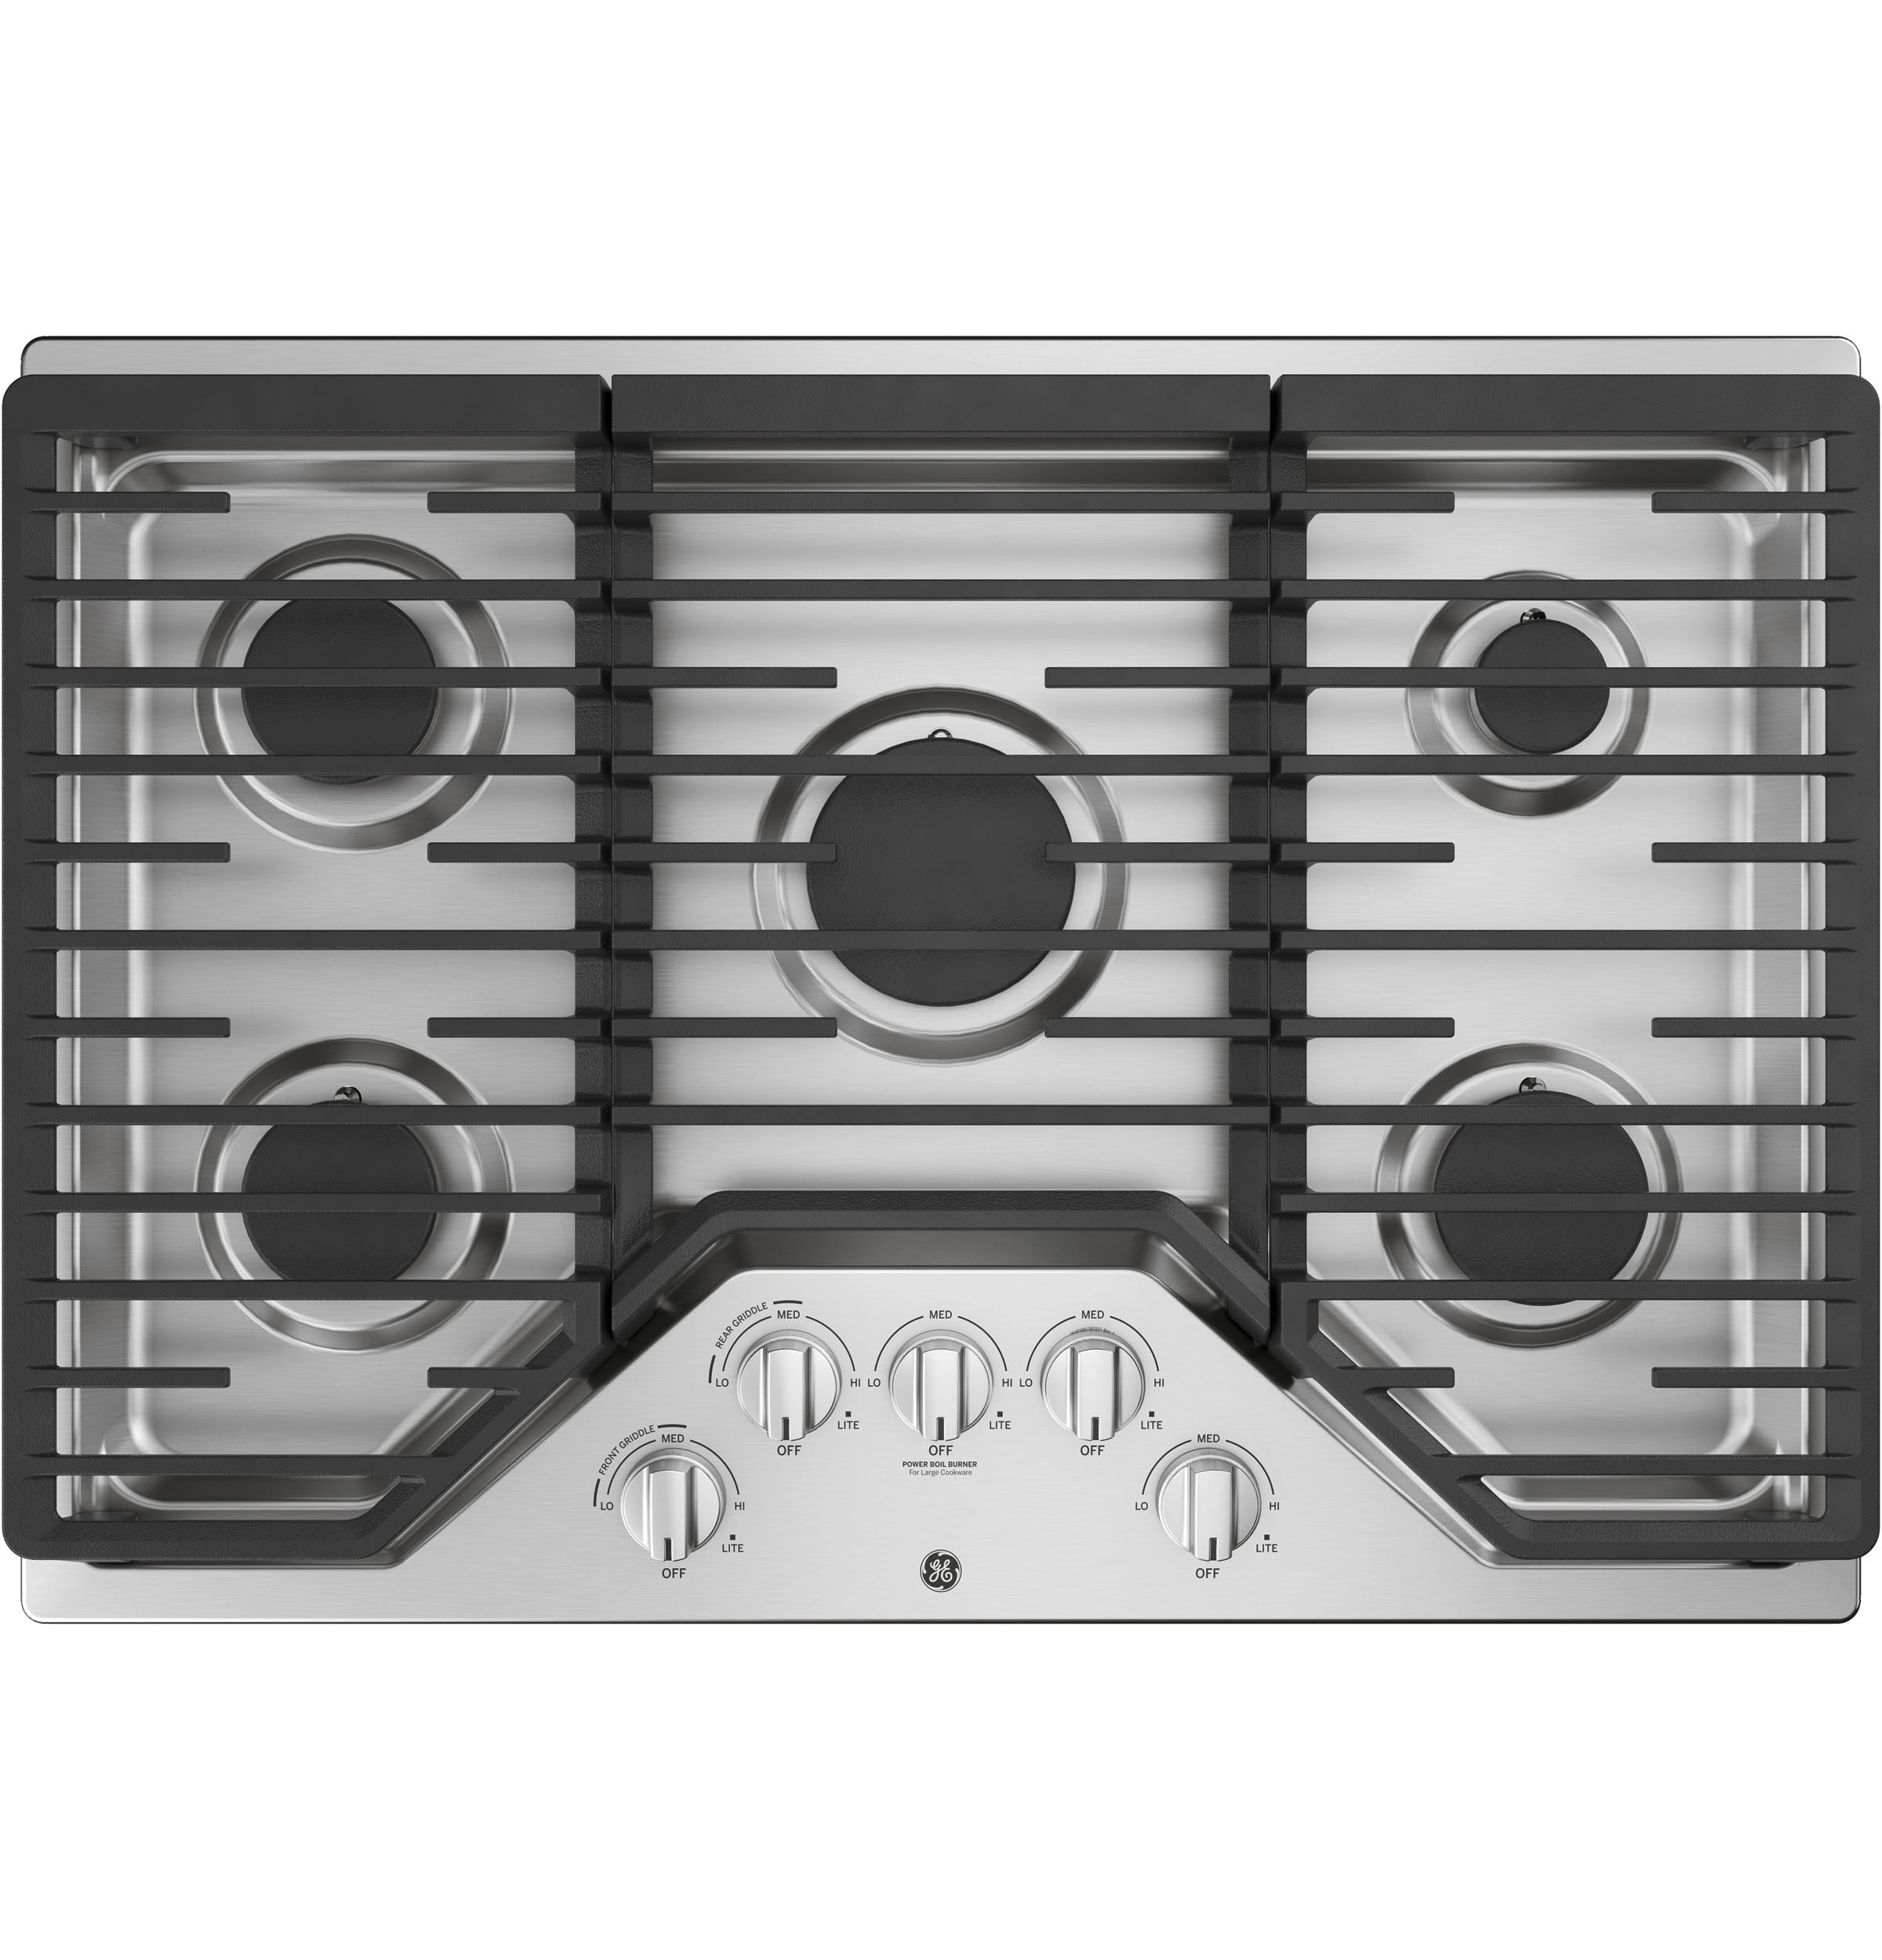 GE - 30 Inch Gas Cooktop in Stainless - JGP5030SLSS